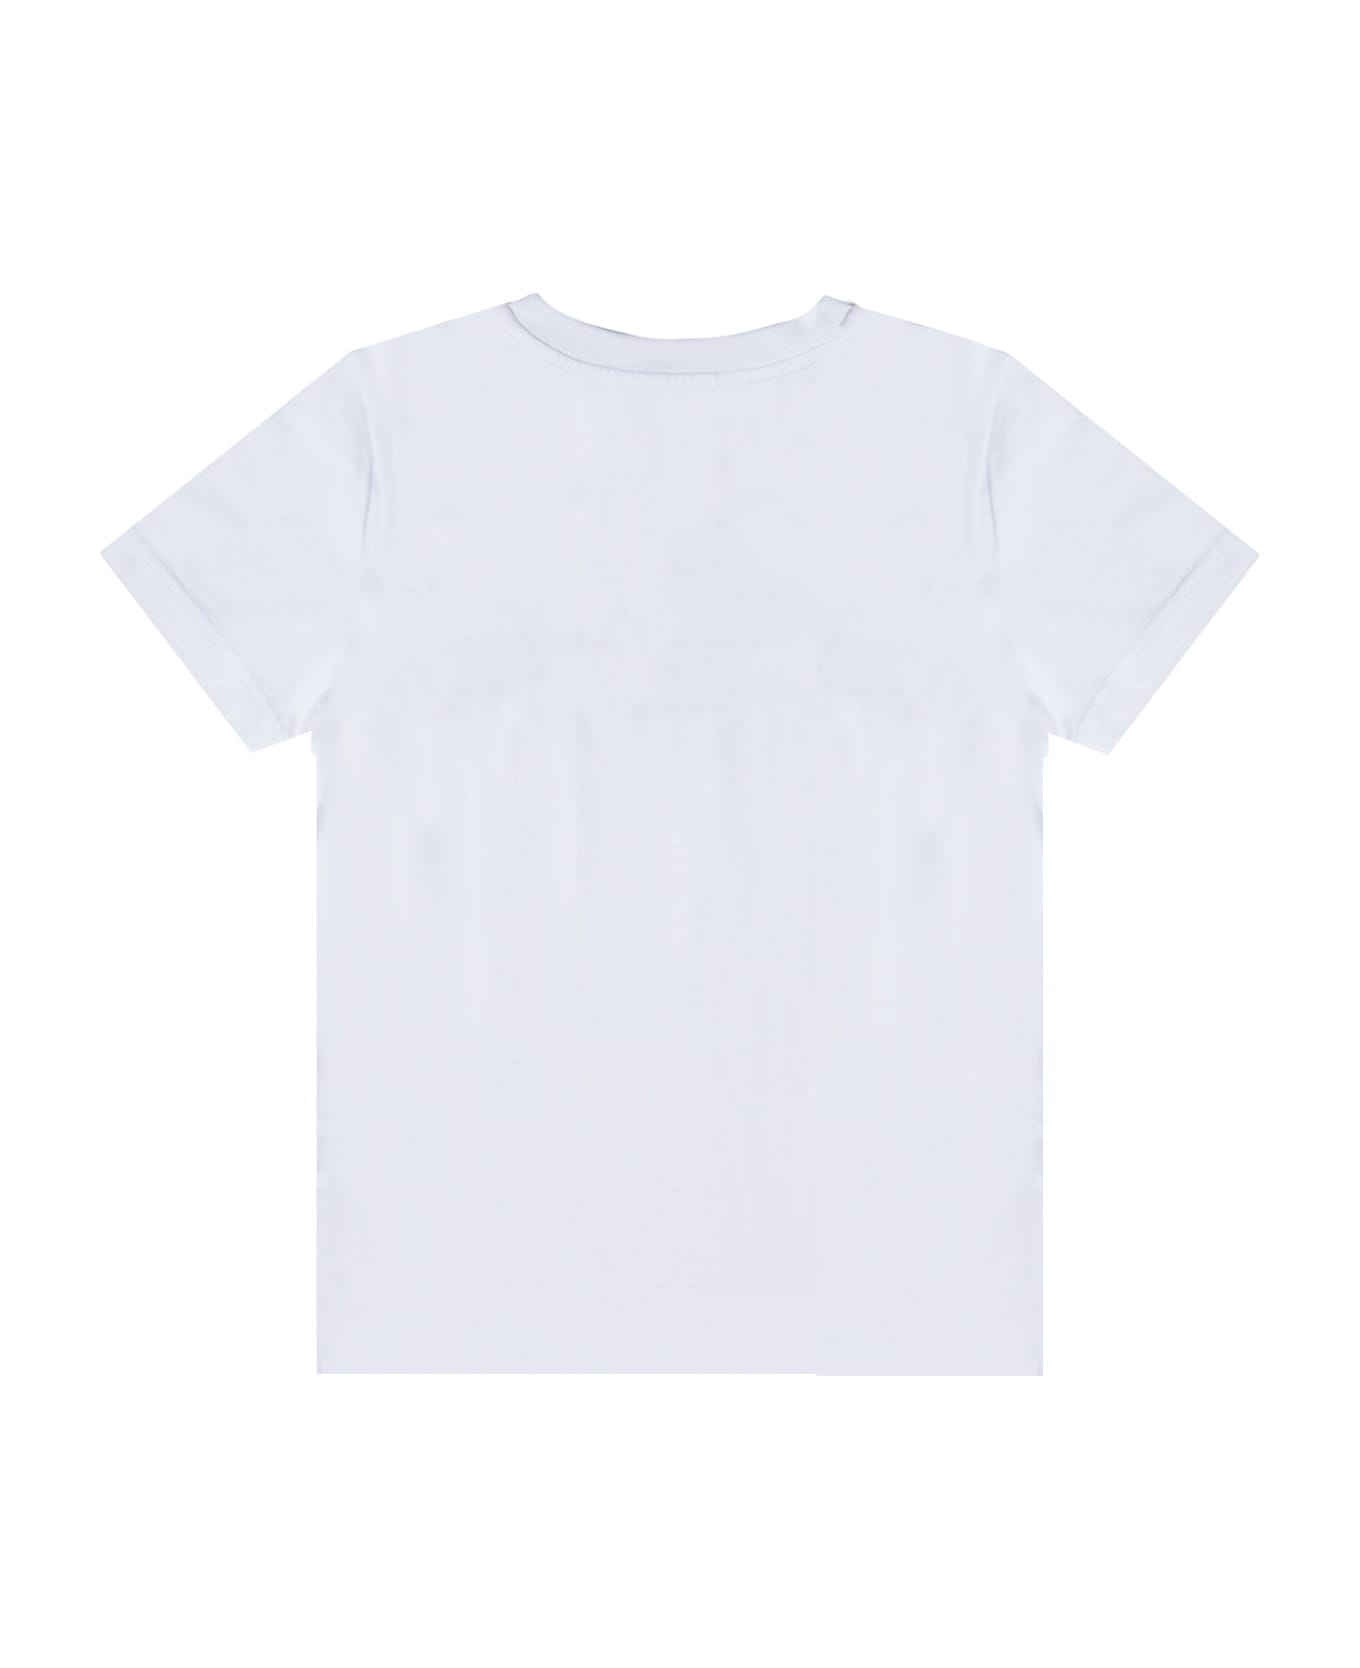 Givenchy T-shirt - White Tシャツ＆ポロシャツ